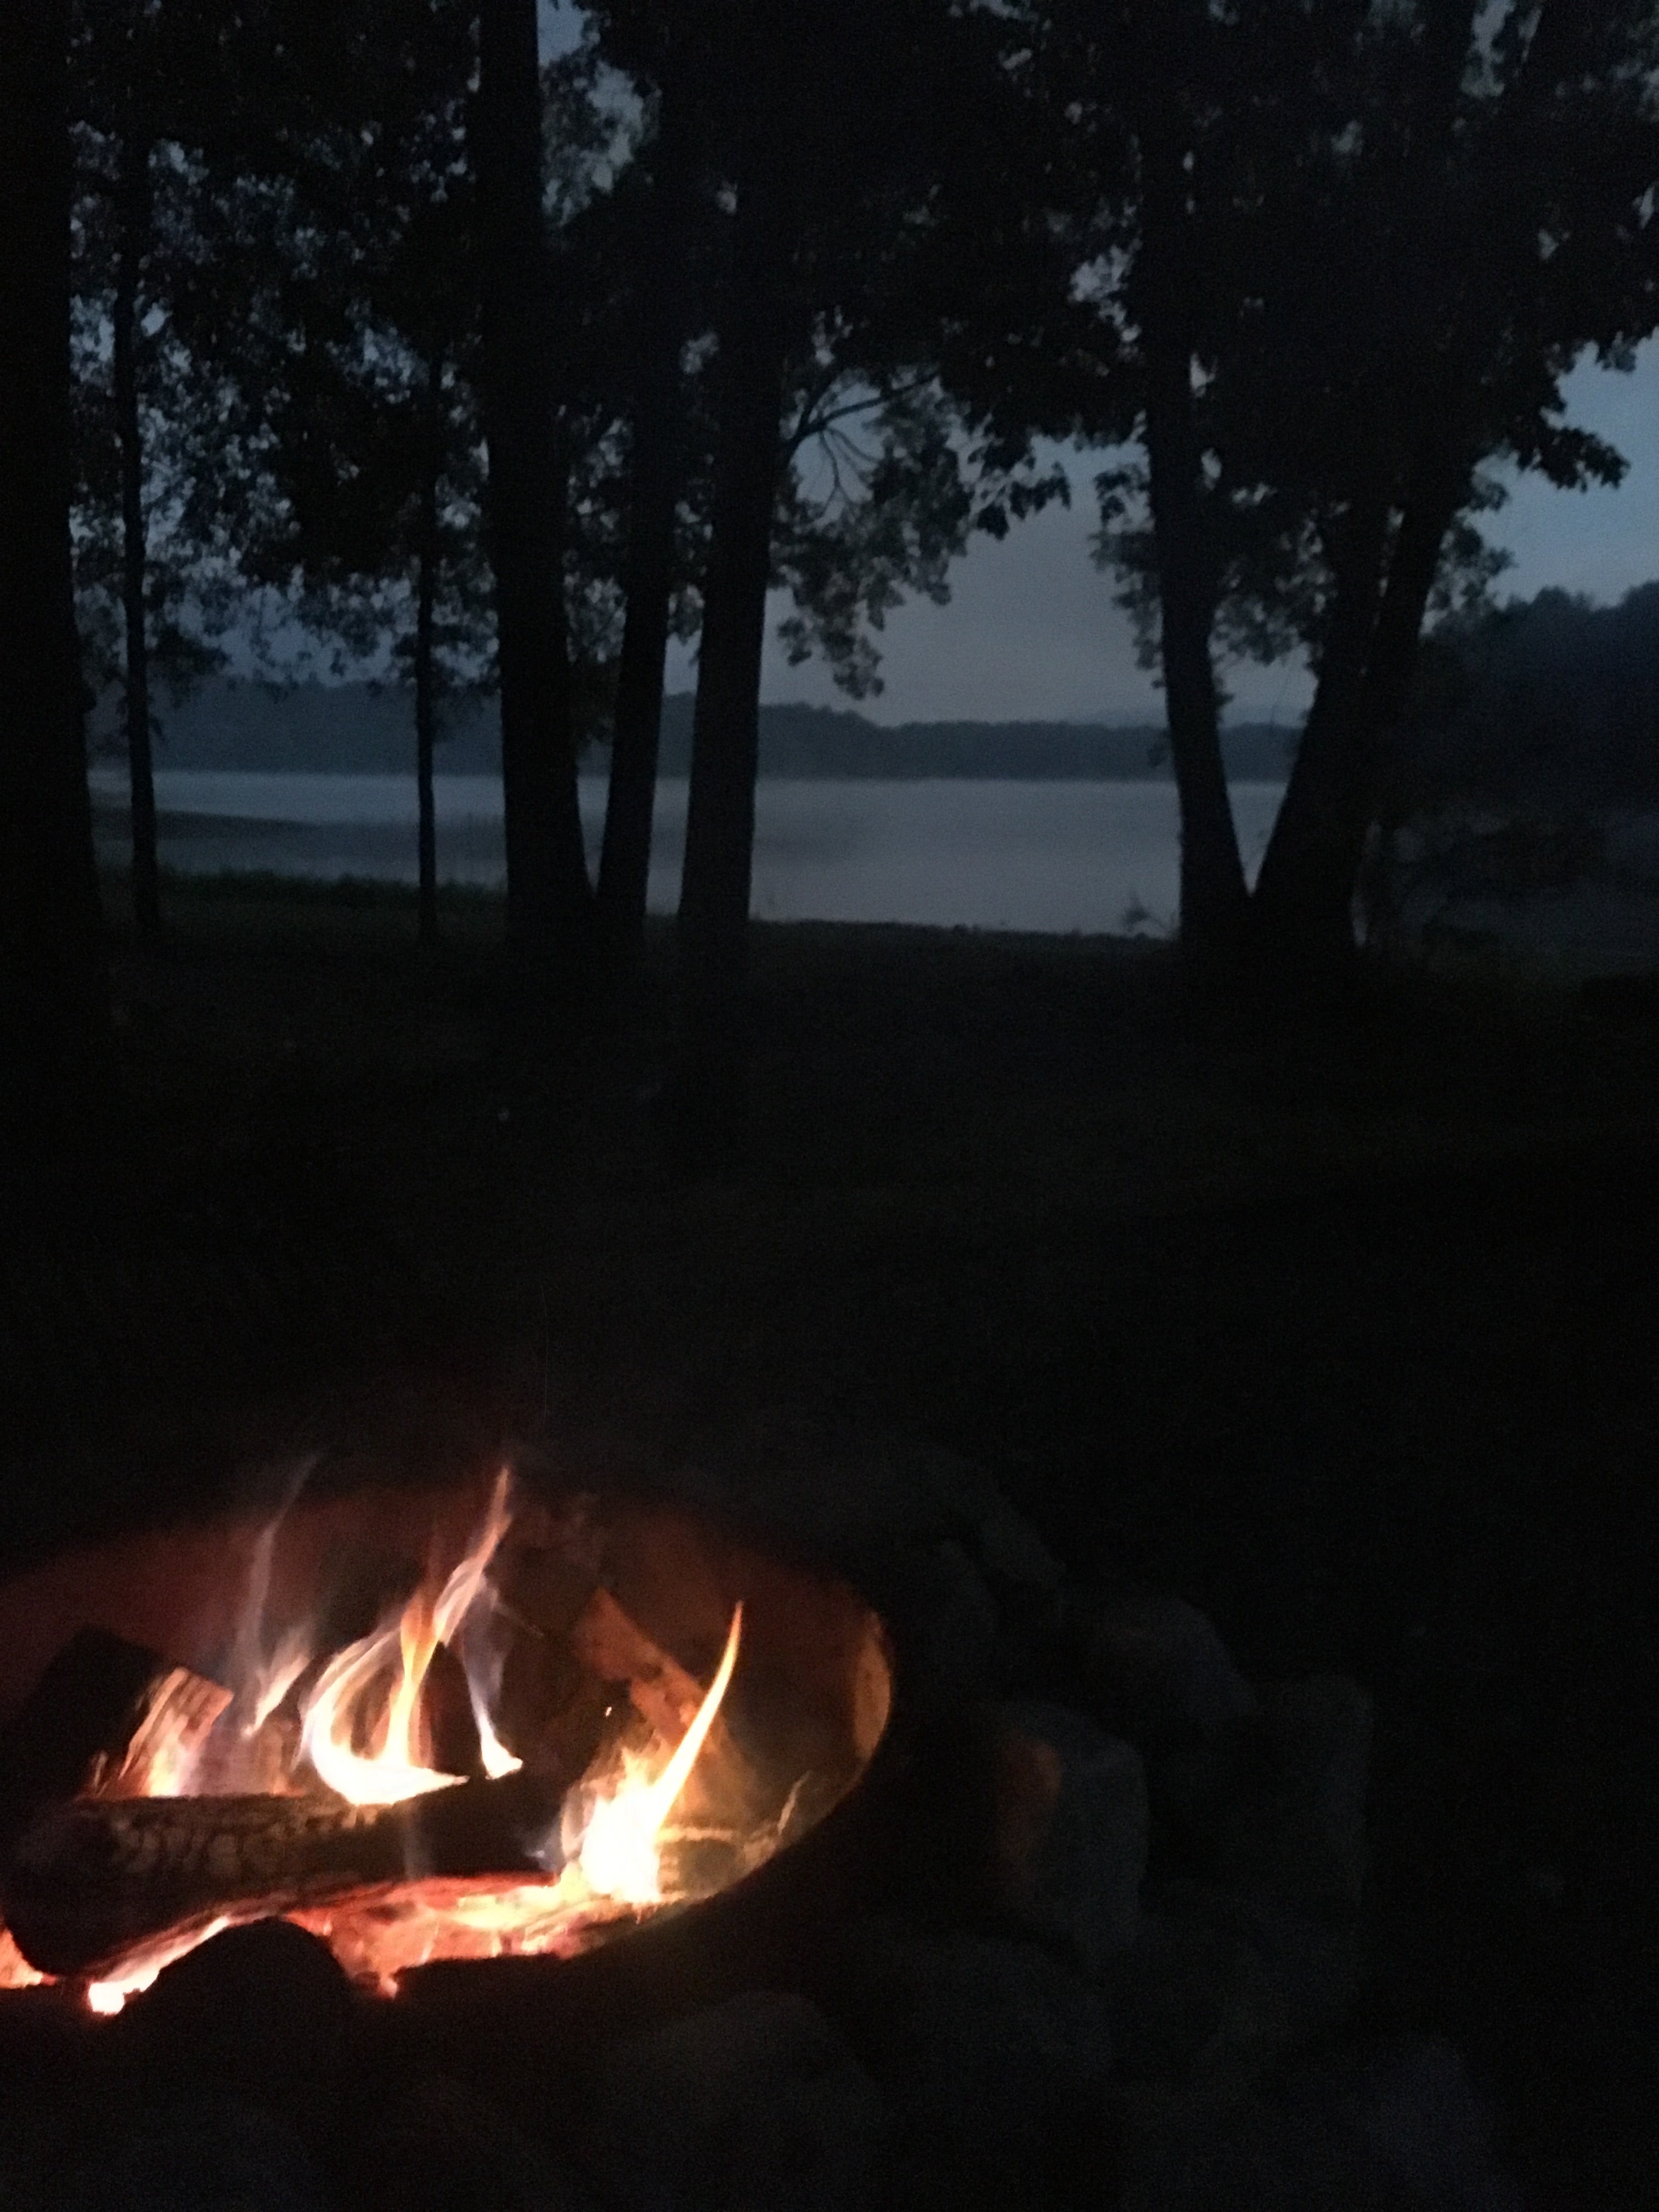 Fire by the water